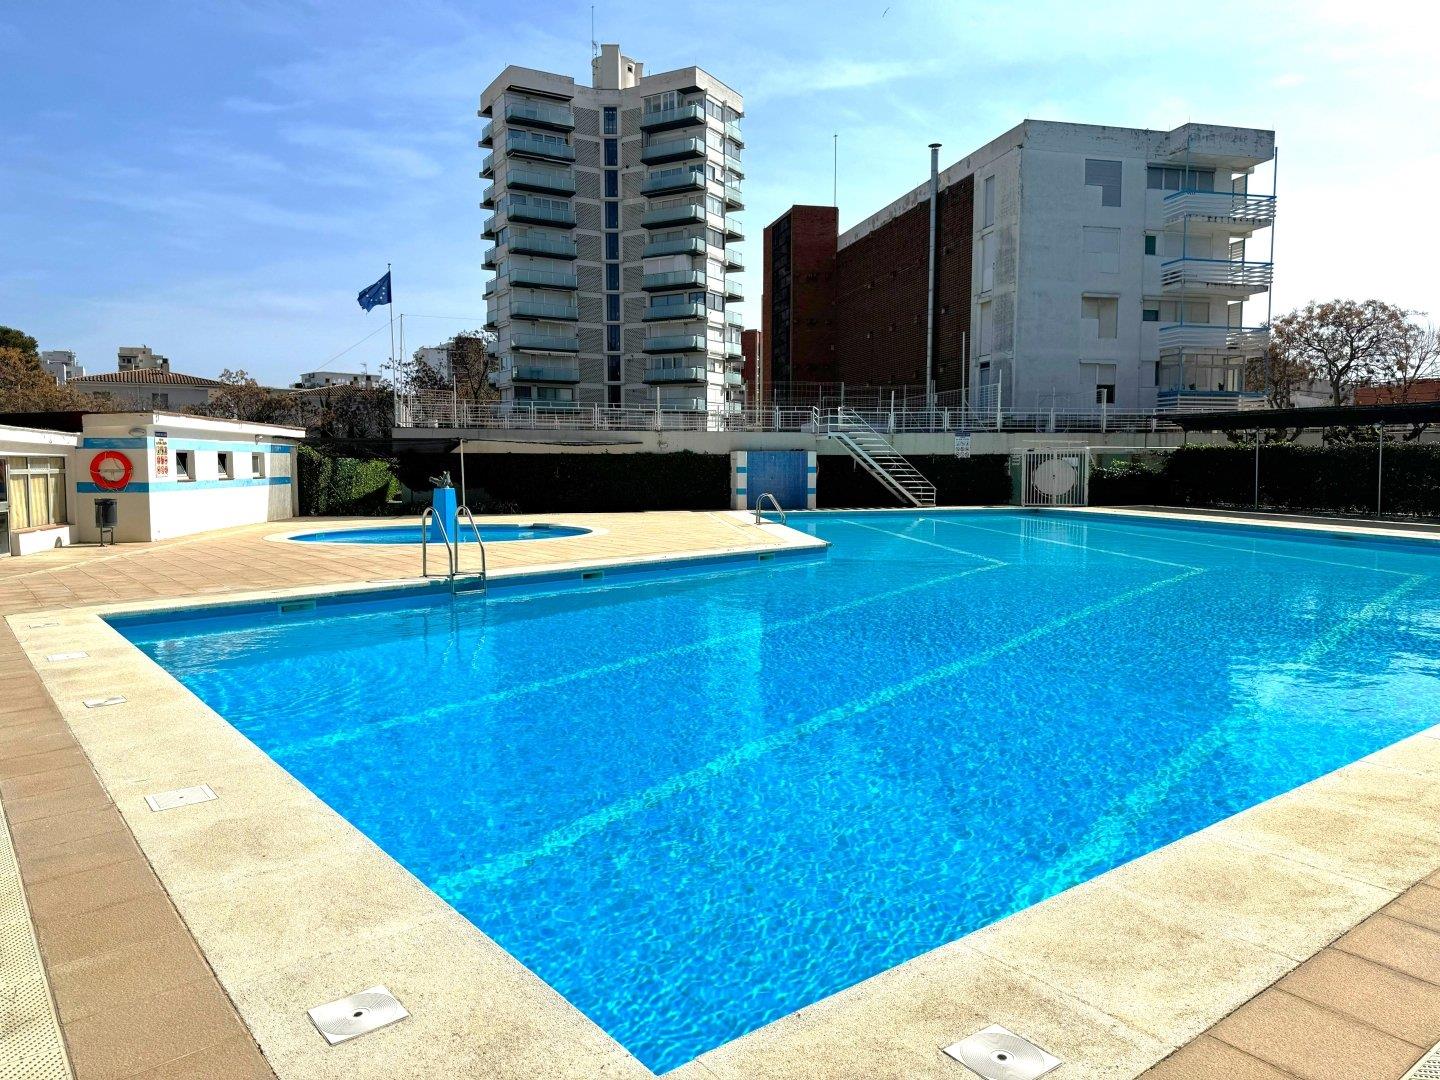 Immo Platja D'aro presents this magnificent and practical apartment in Platja d'Aro.